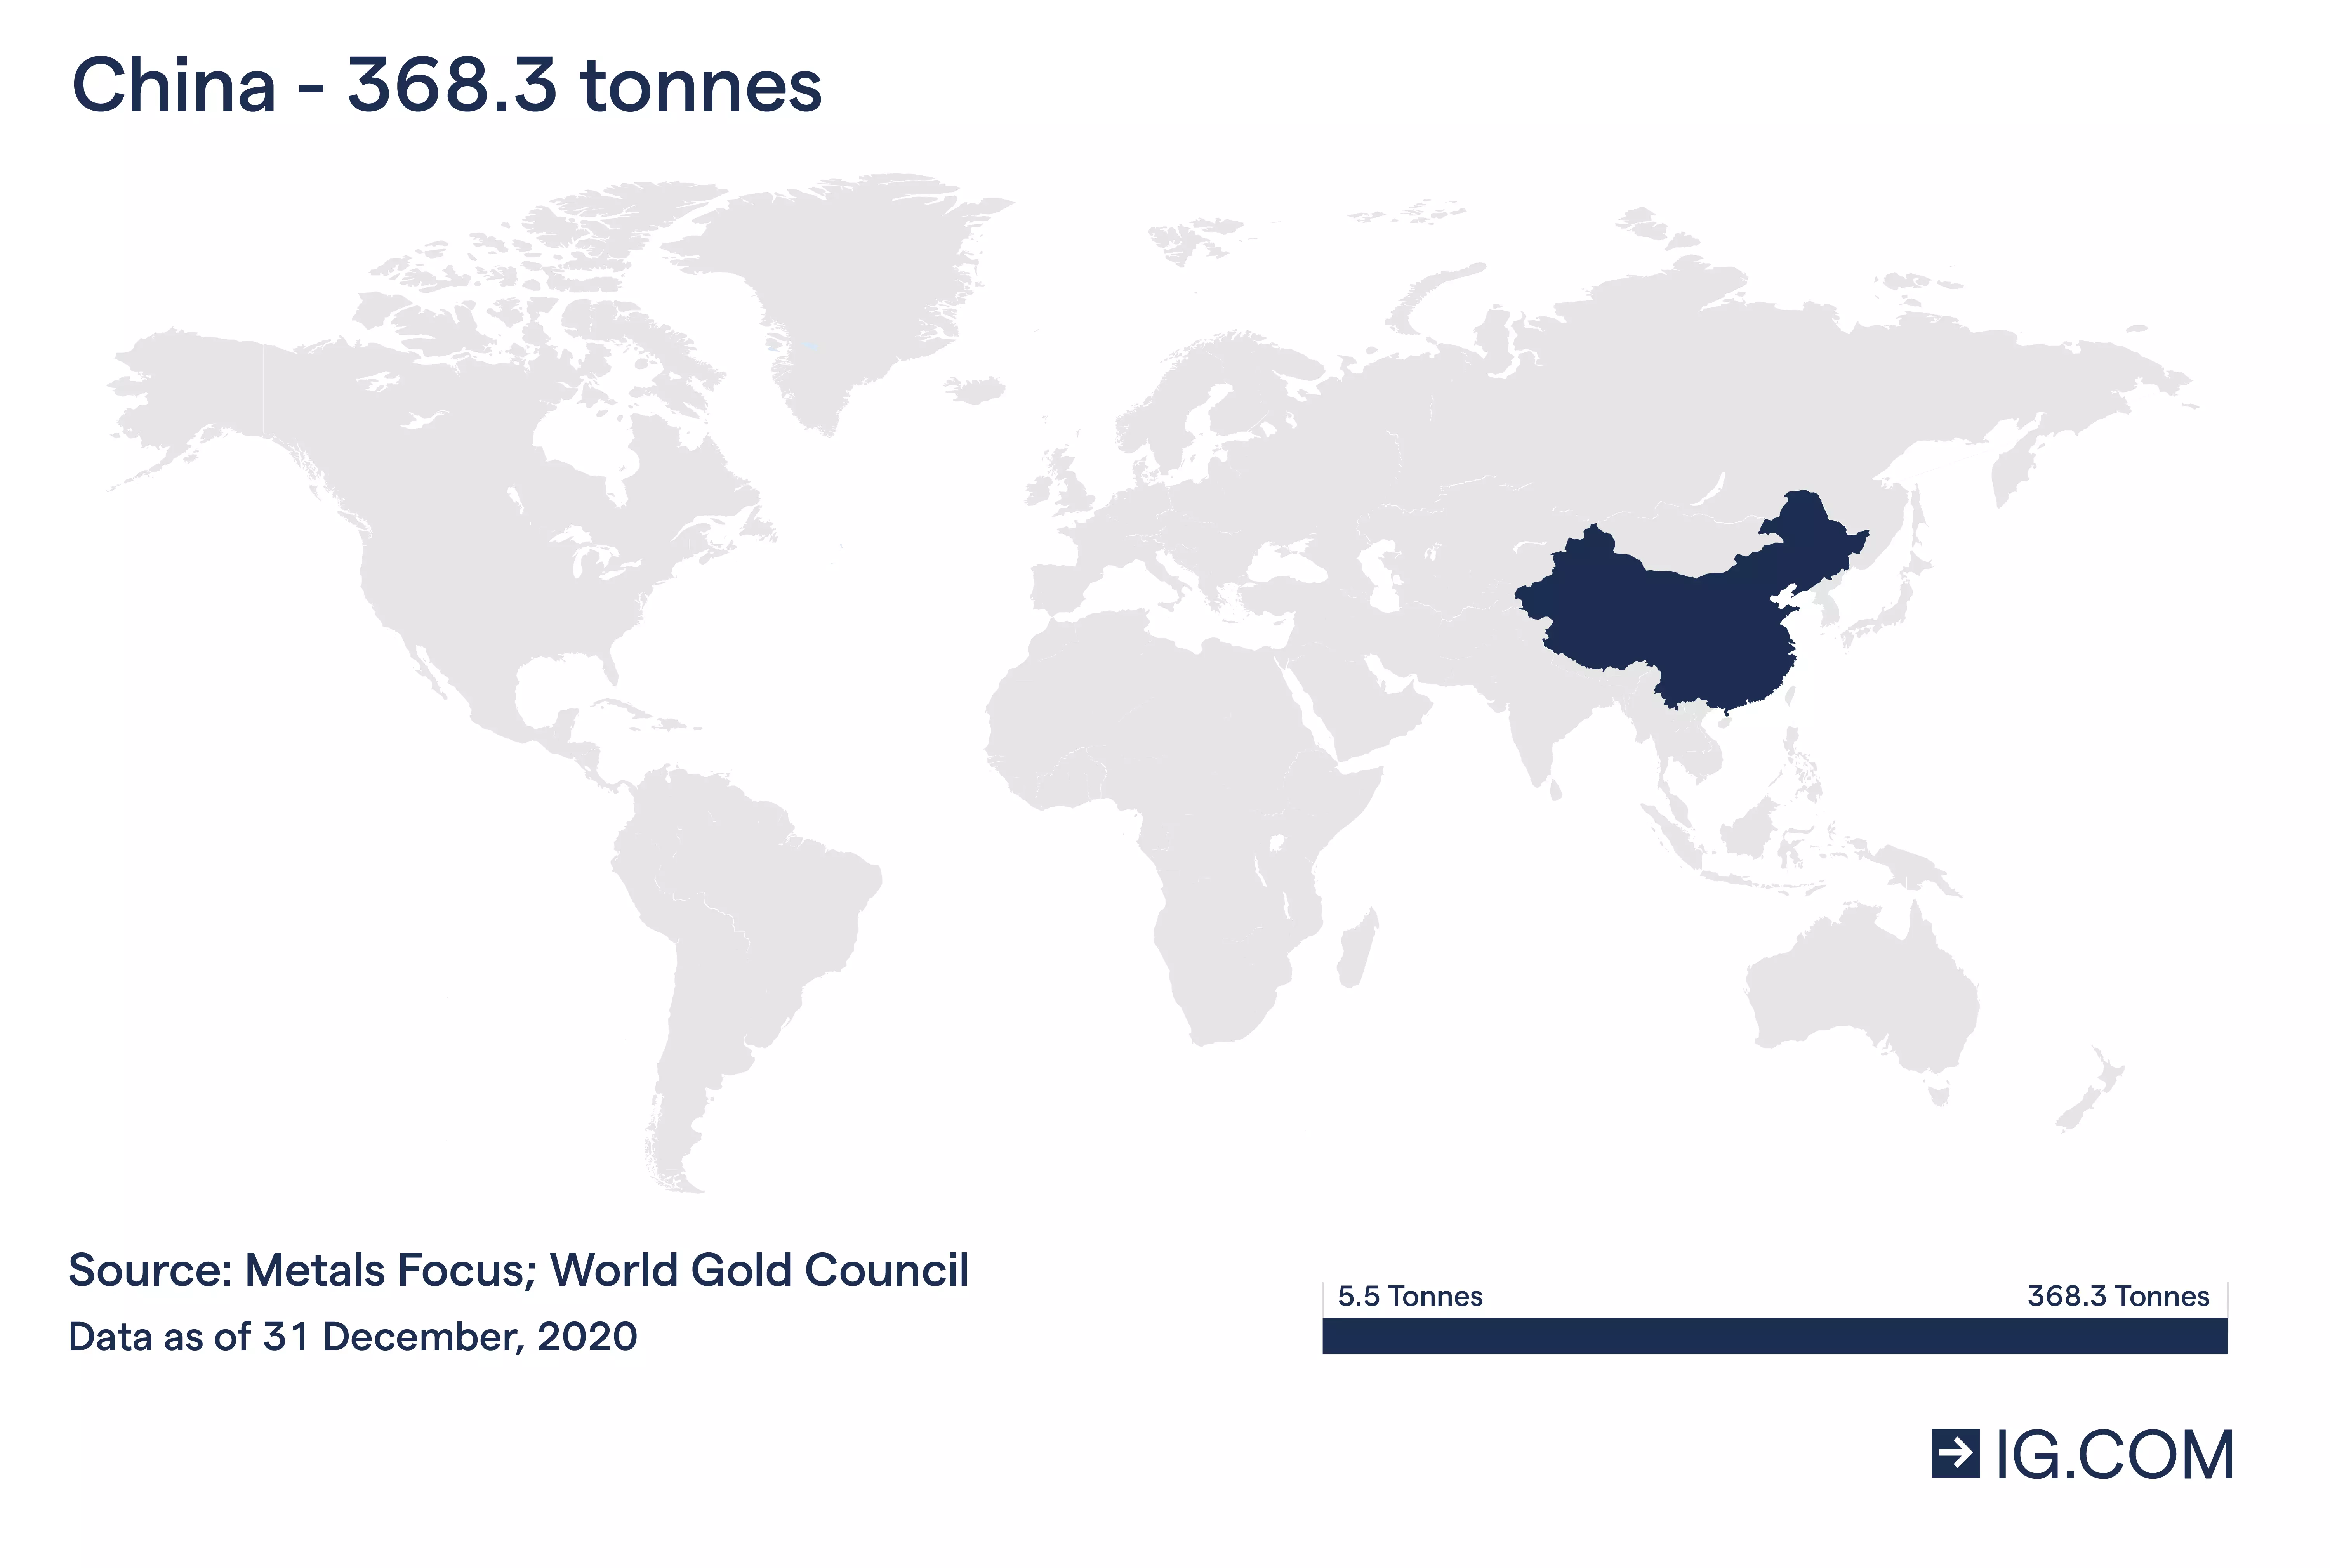 World map showing the contour of China as the world’s largest gold producer